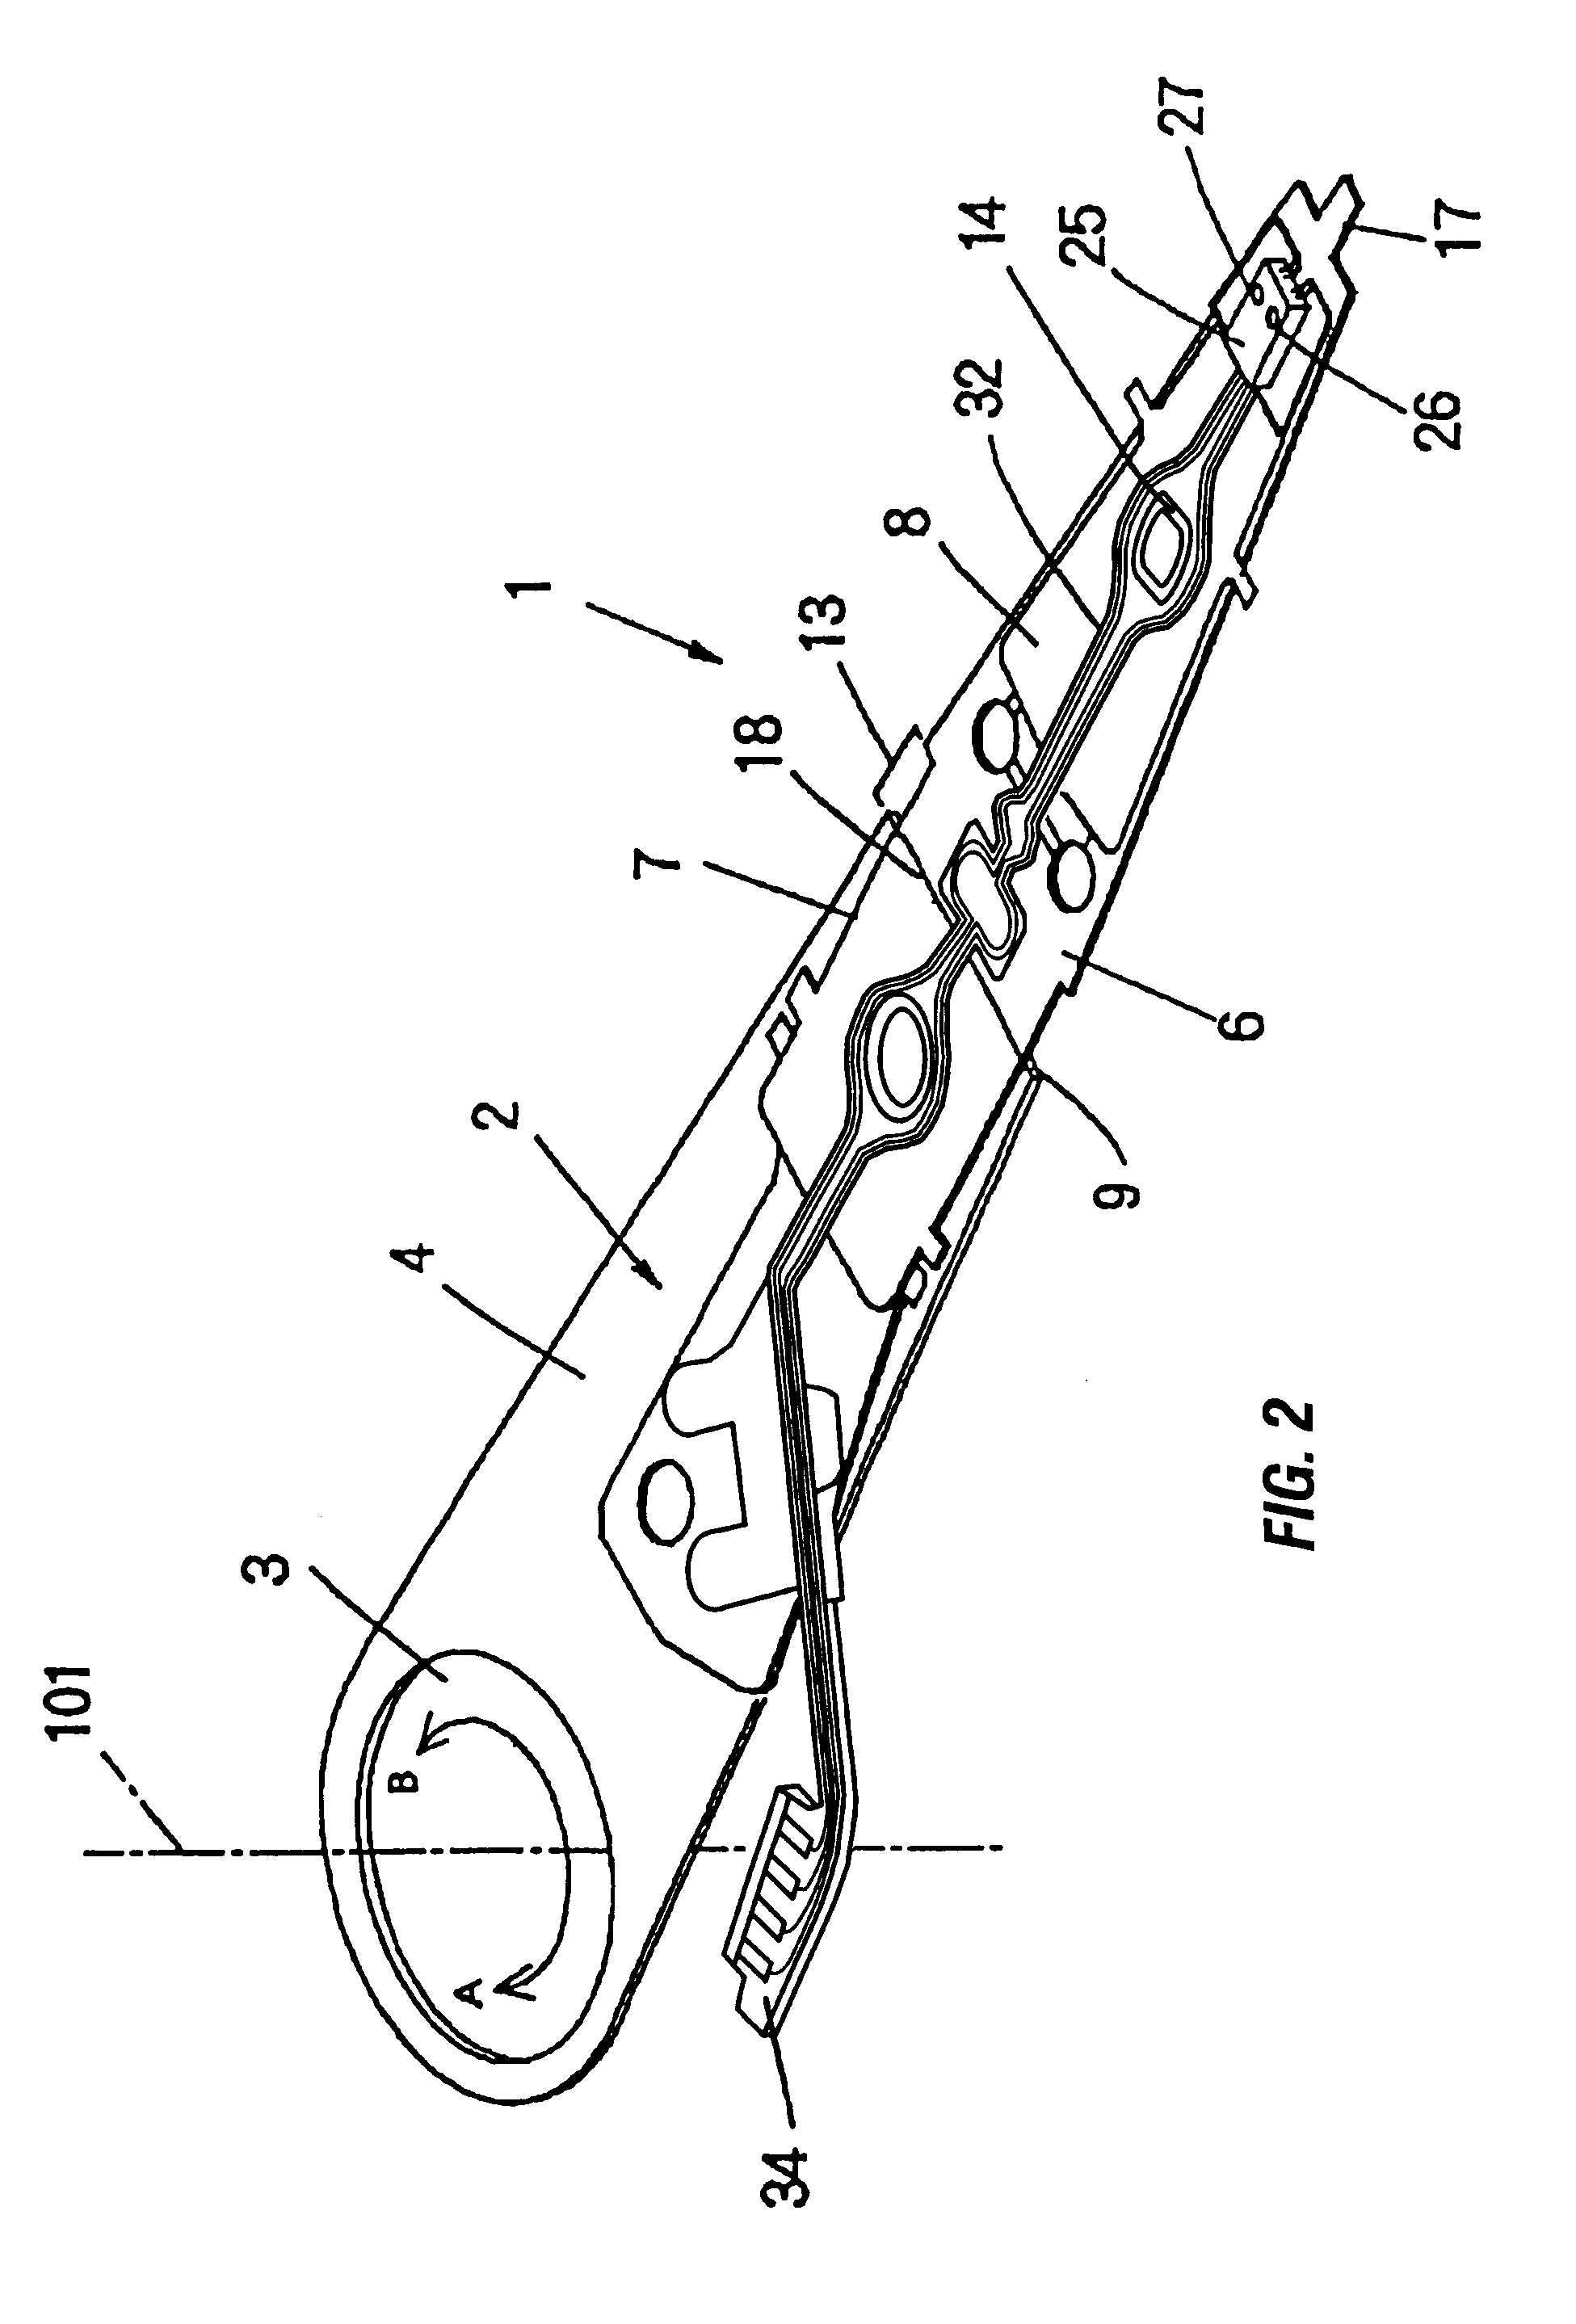 Hard disk drive with slider support structure and head gimbal assembly